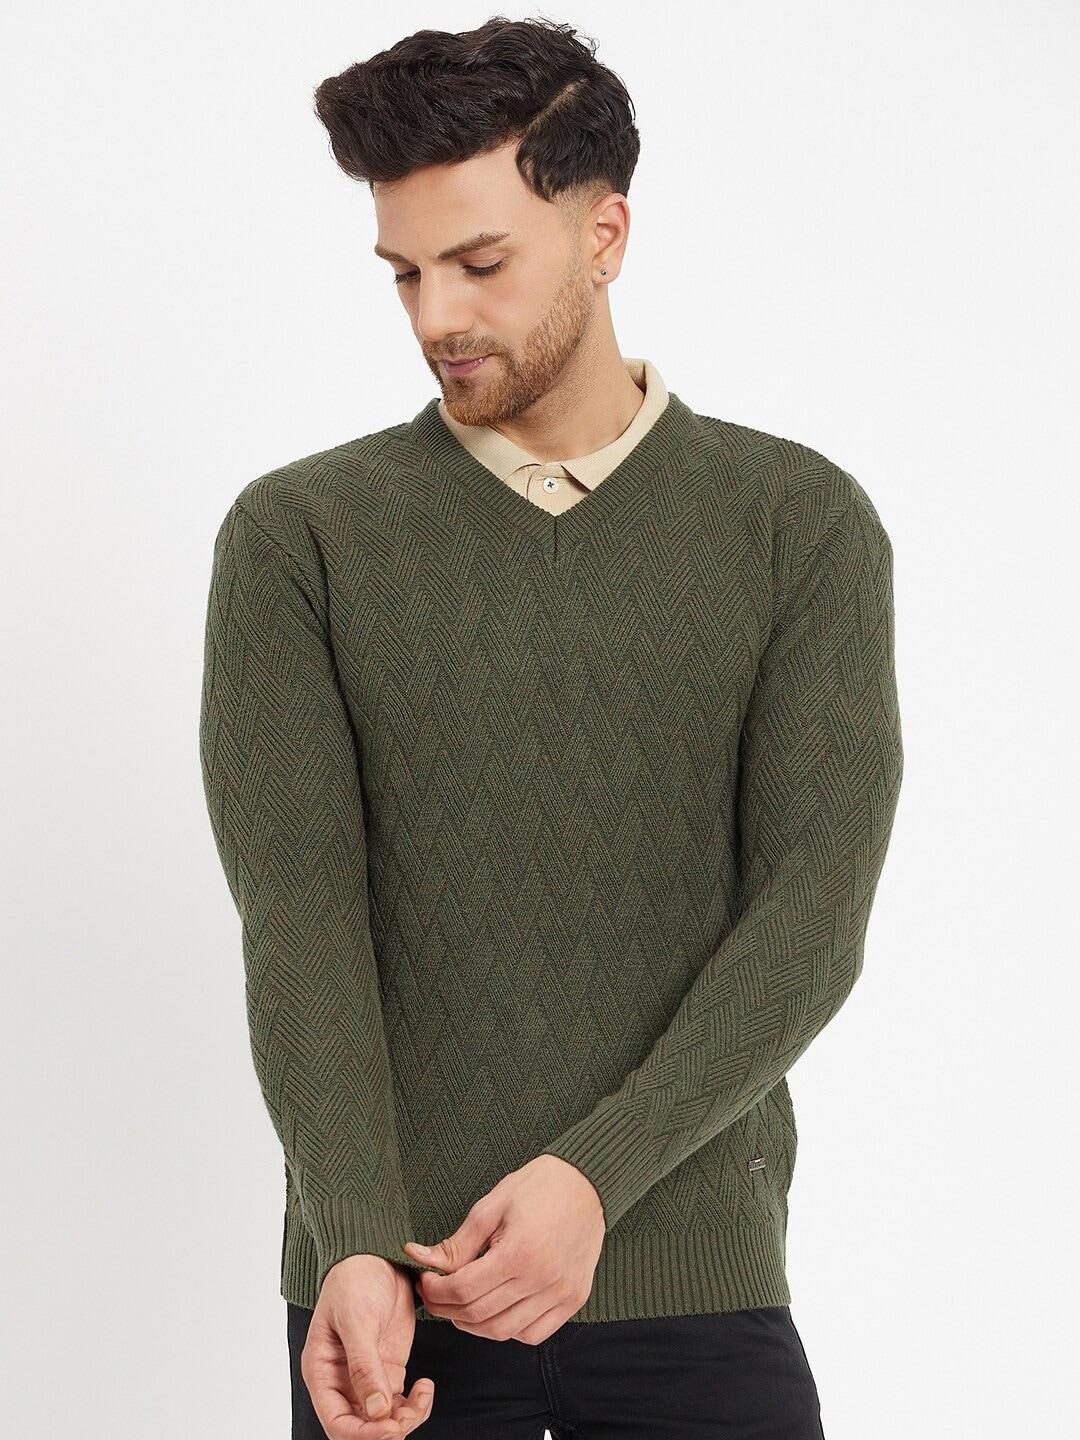 duke-cable-knit-pullover-sweaters